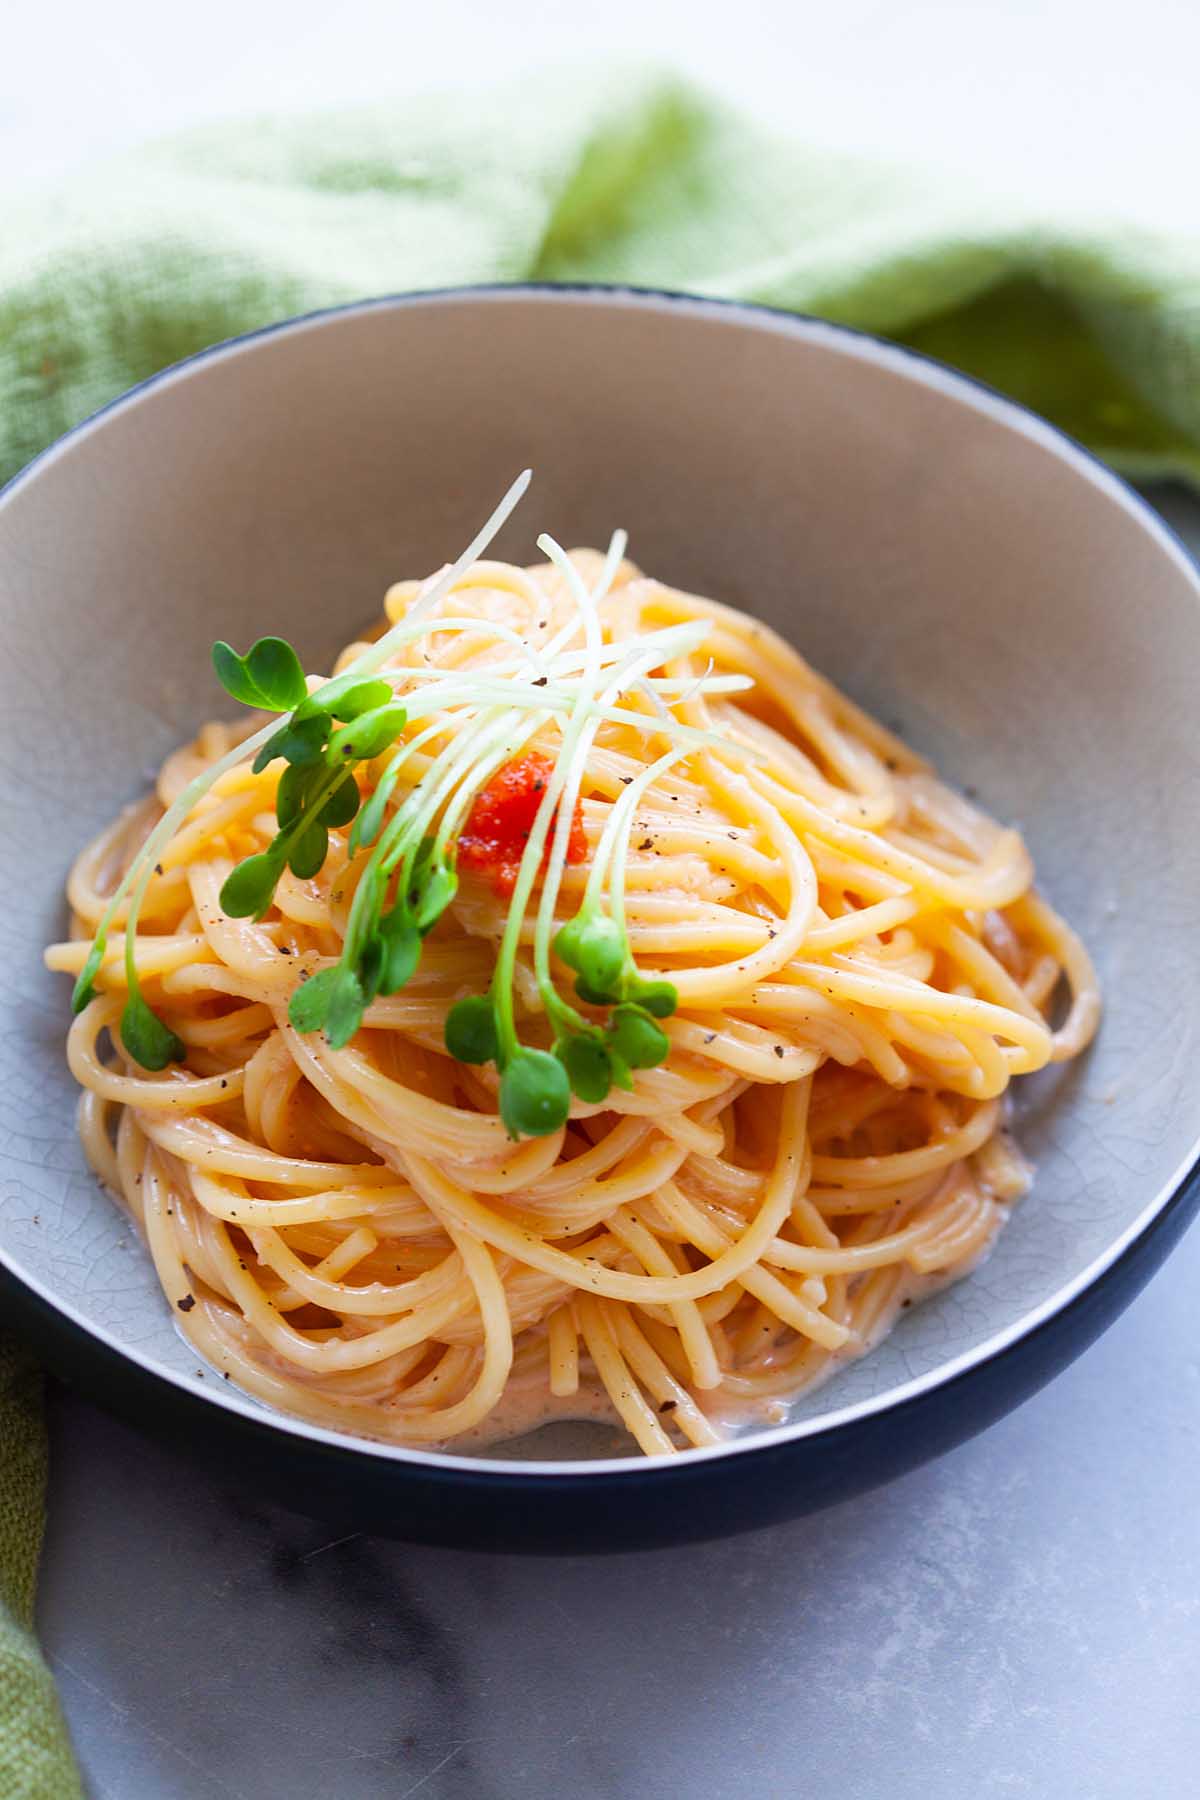 Mentaiko spaghetti dish presented in a visually appealing manner, featuring vibrant colors and enticing flavors.